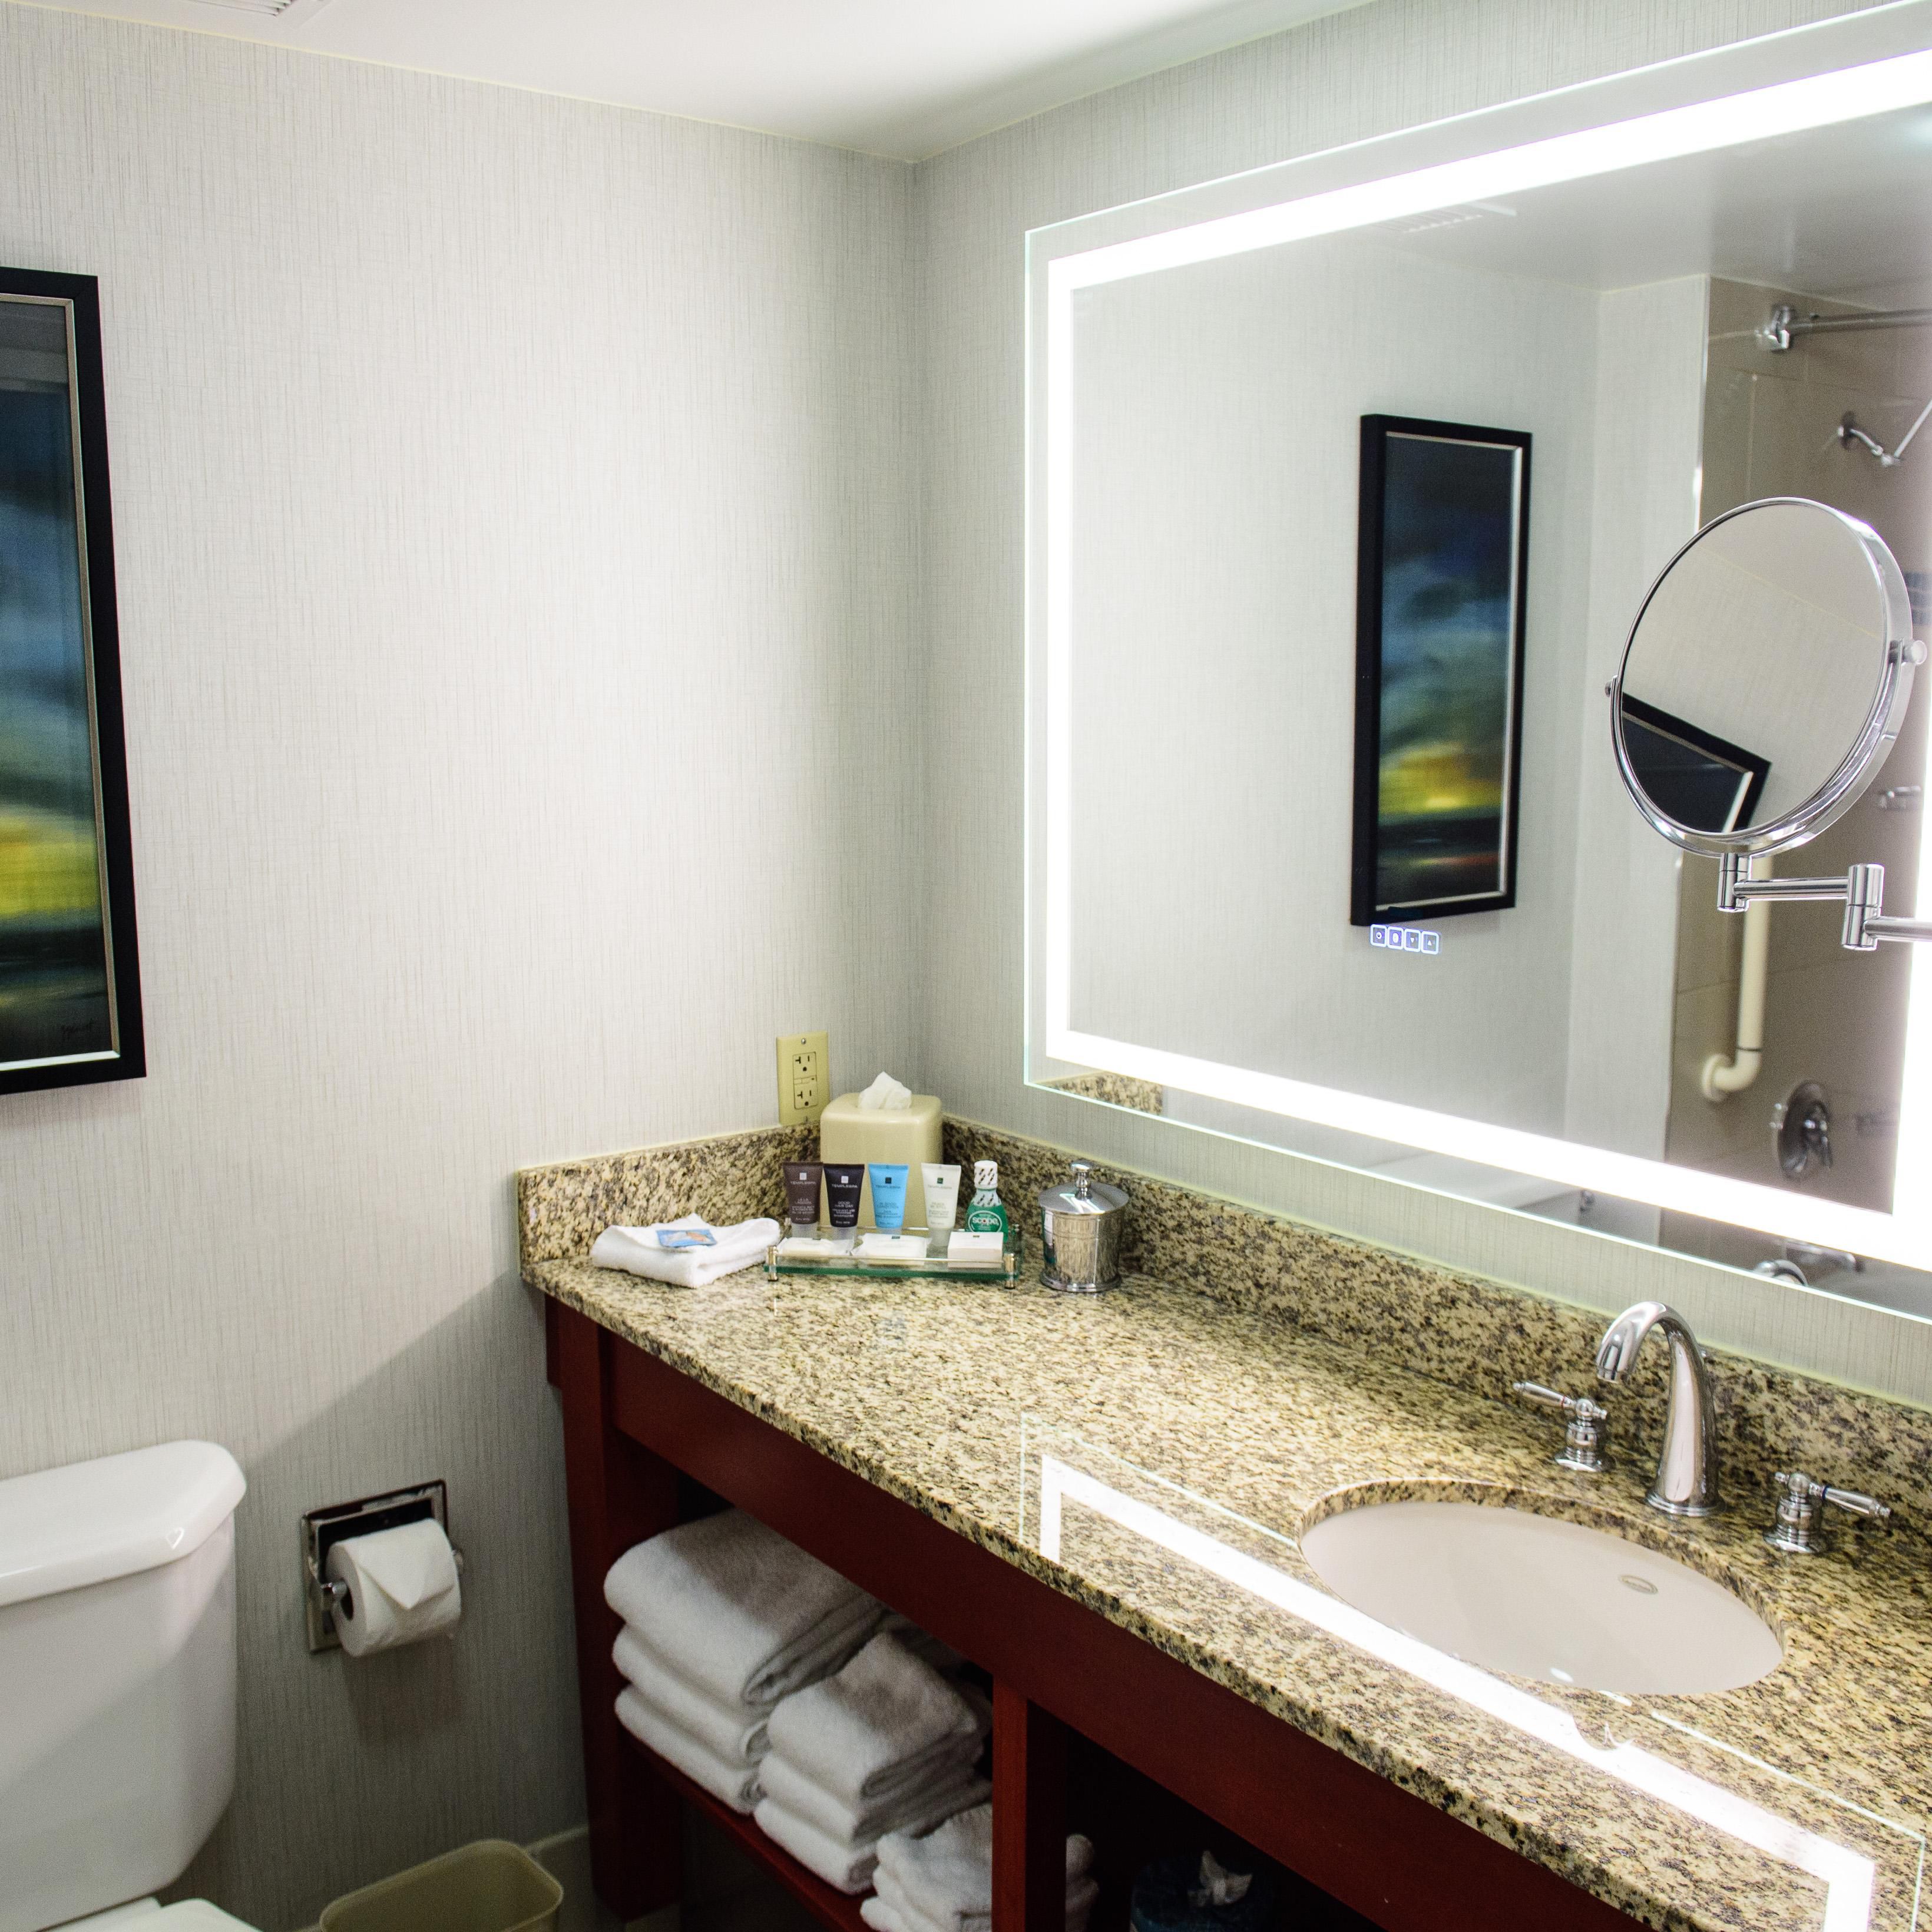 These rooms are equipped with the advanced mobile Make Up Mirror.